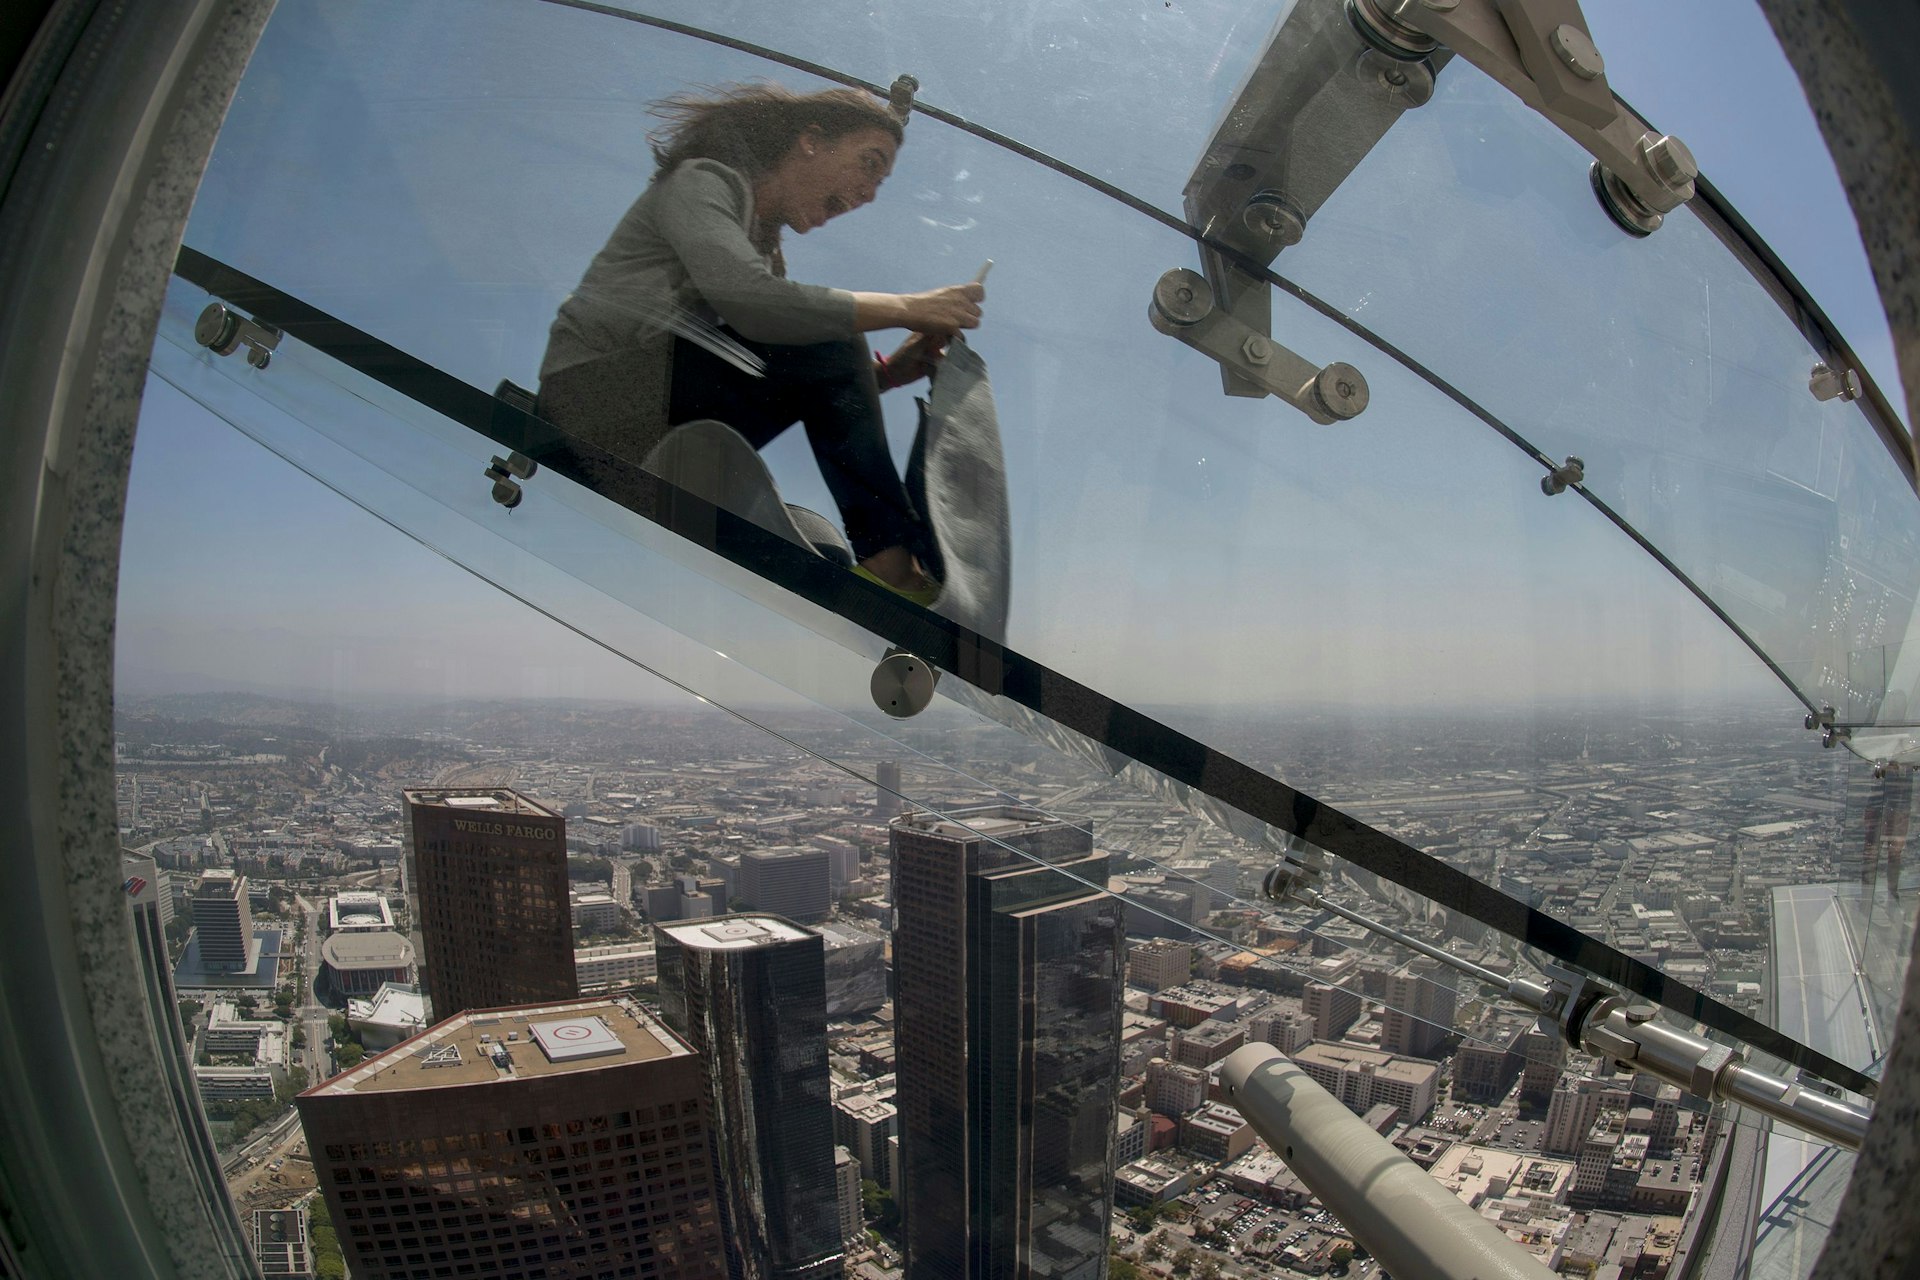 Woman slides down the Skyslide, a 45-foot outdoor glass slide 70 floors up on the outside of the US Bank Tower Woman slides down the Skyslide, a 45-foot outdoor glass slide 70 floors up on the outside of the US Bank Tower © David Mcnew / Getty Images